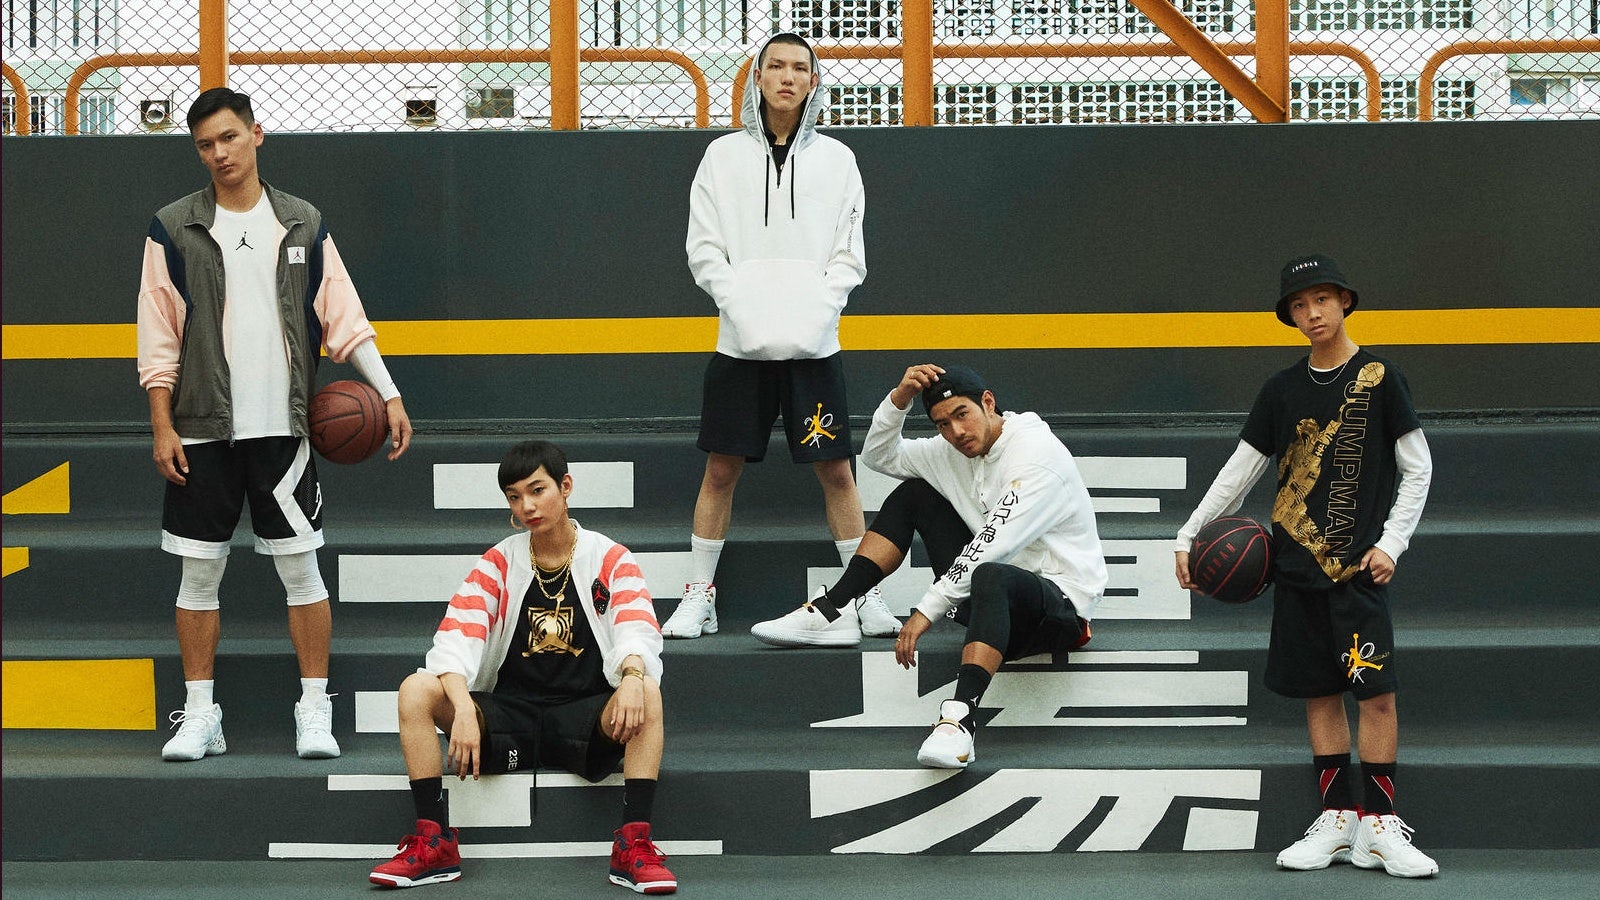 Post-pandemic, retailers have replaced universal approaches with personalized experiences and customized products. These are the four best ways luxury brands can localize in China. Photo: Courtesy of Nike